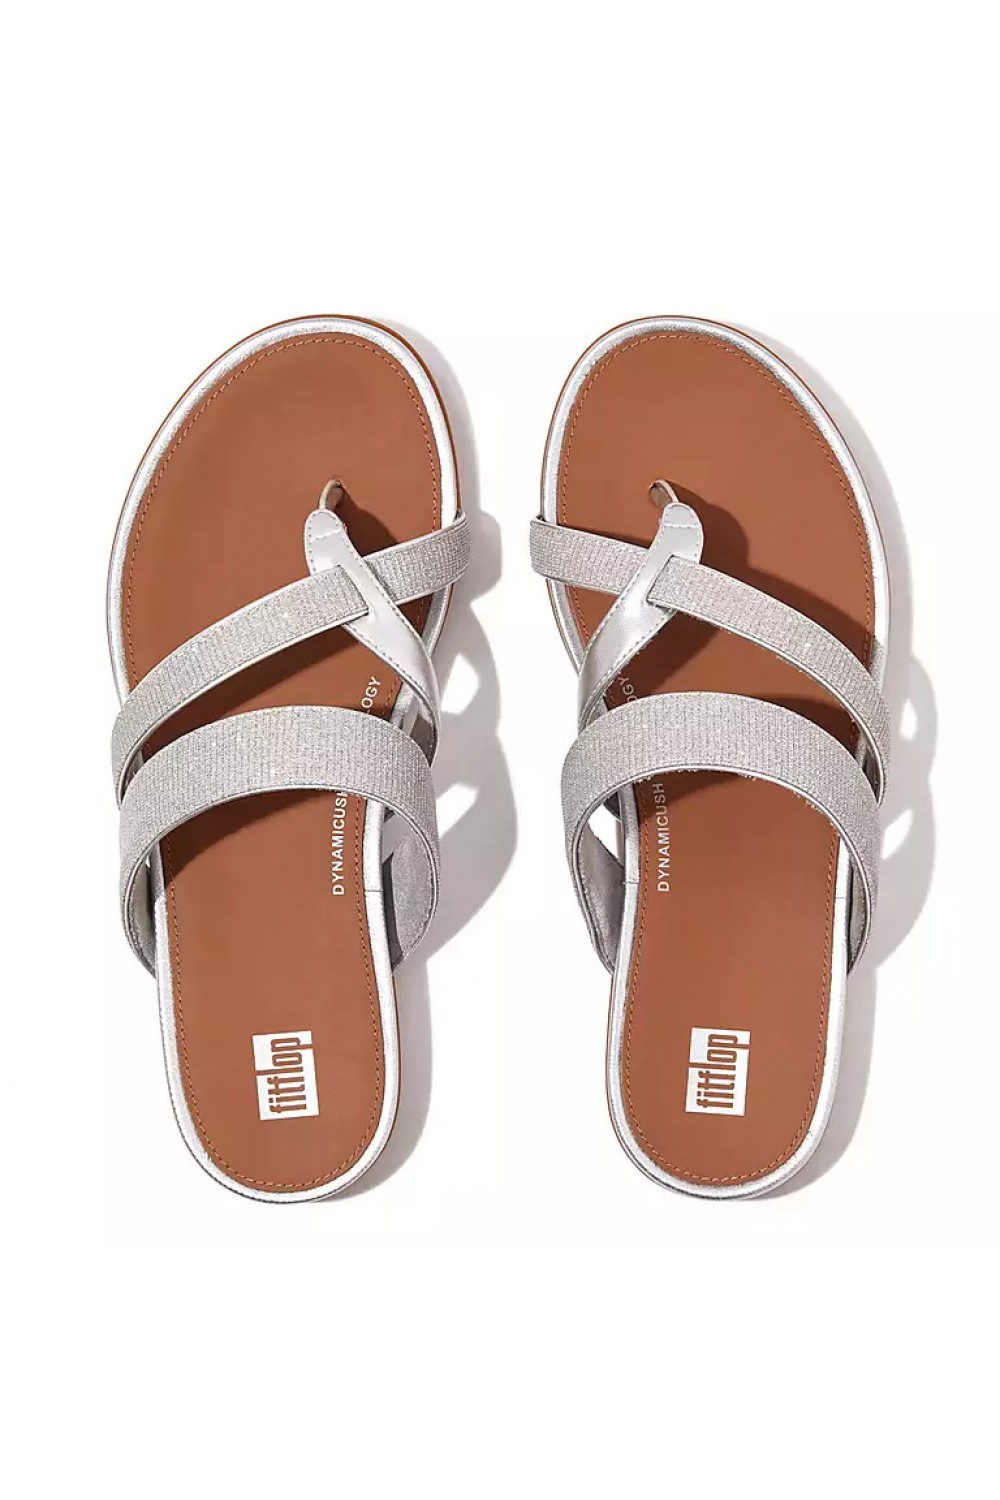 Fitflop Gracie Shimmerlux Strappy Toe-Post Sandals Silver